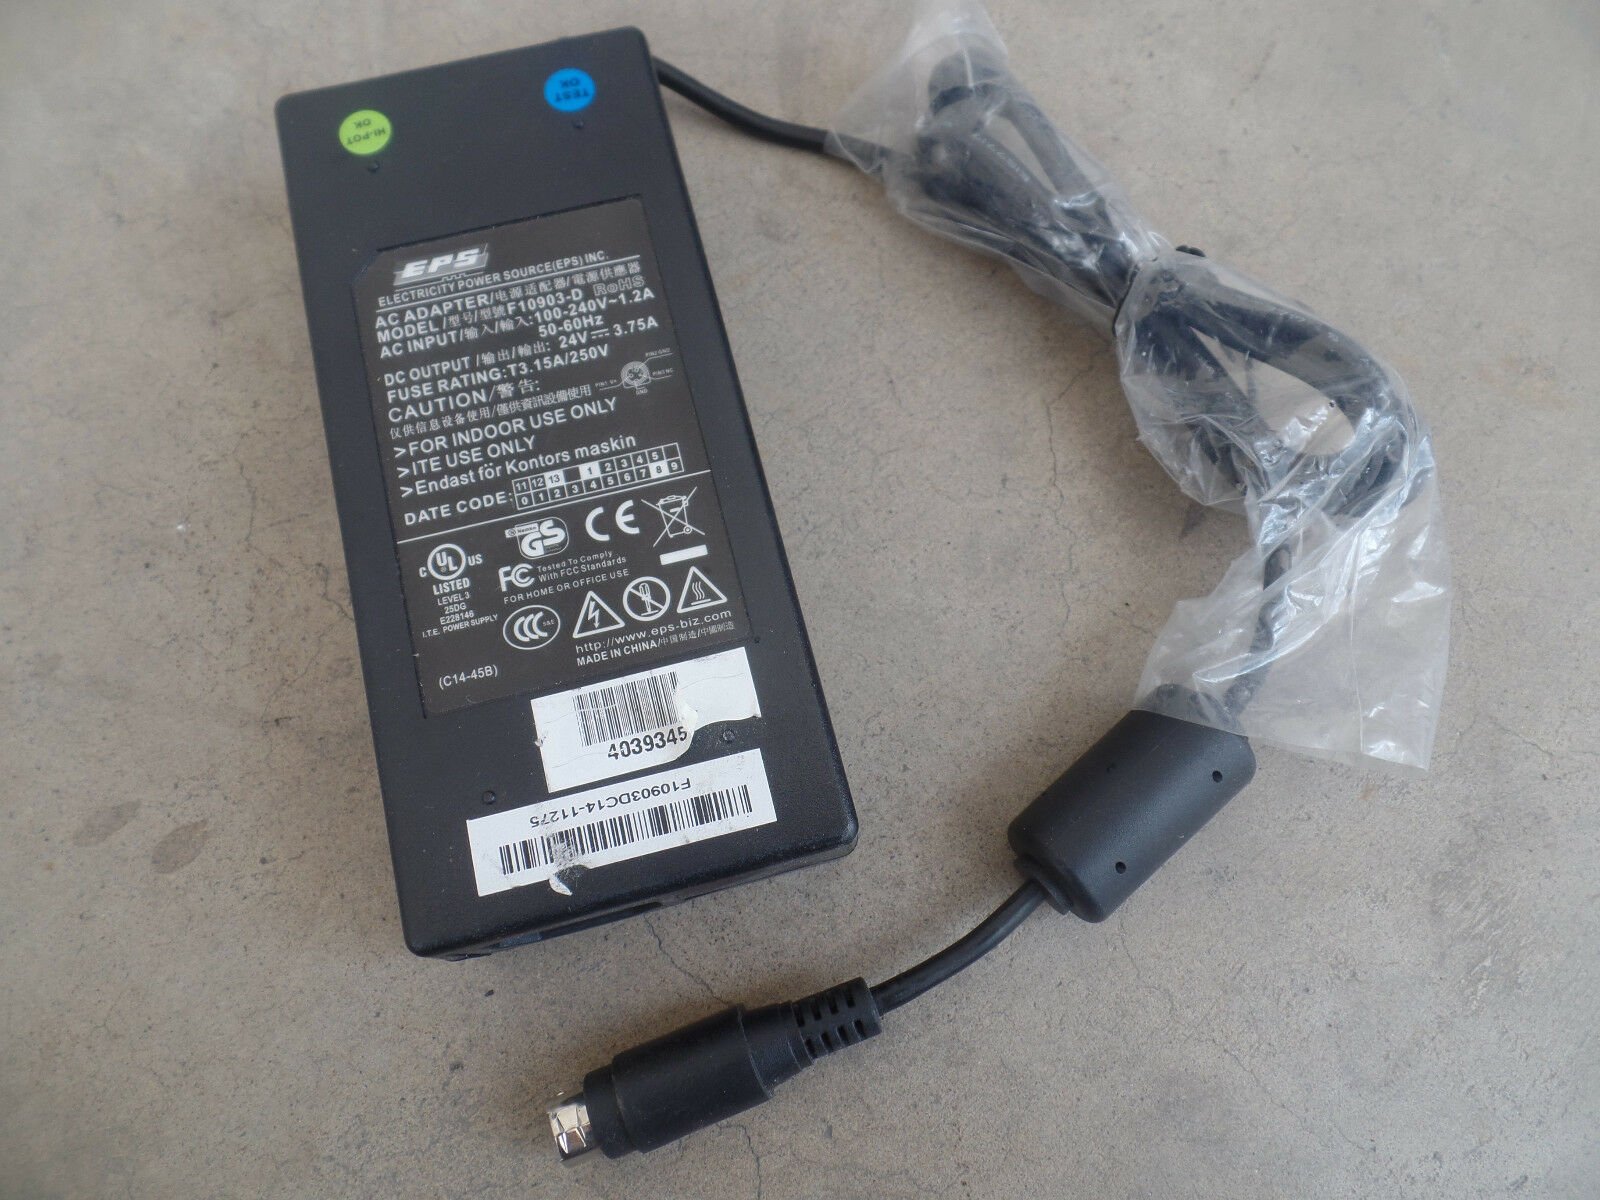 New EPS F10903-D 19V 4.75A 90W AC/DC ADAPTER Power supply